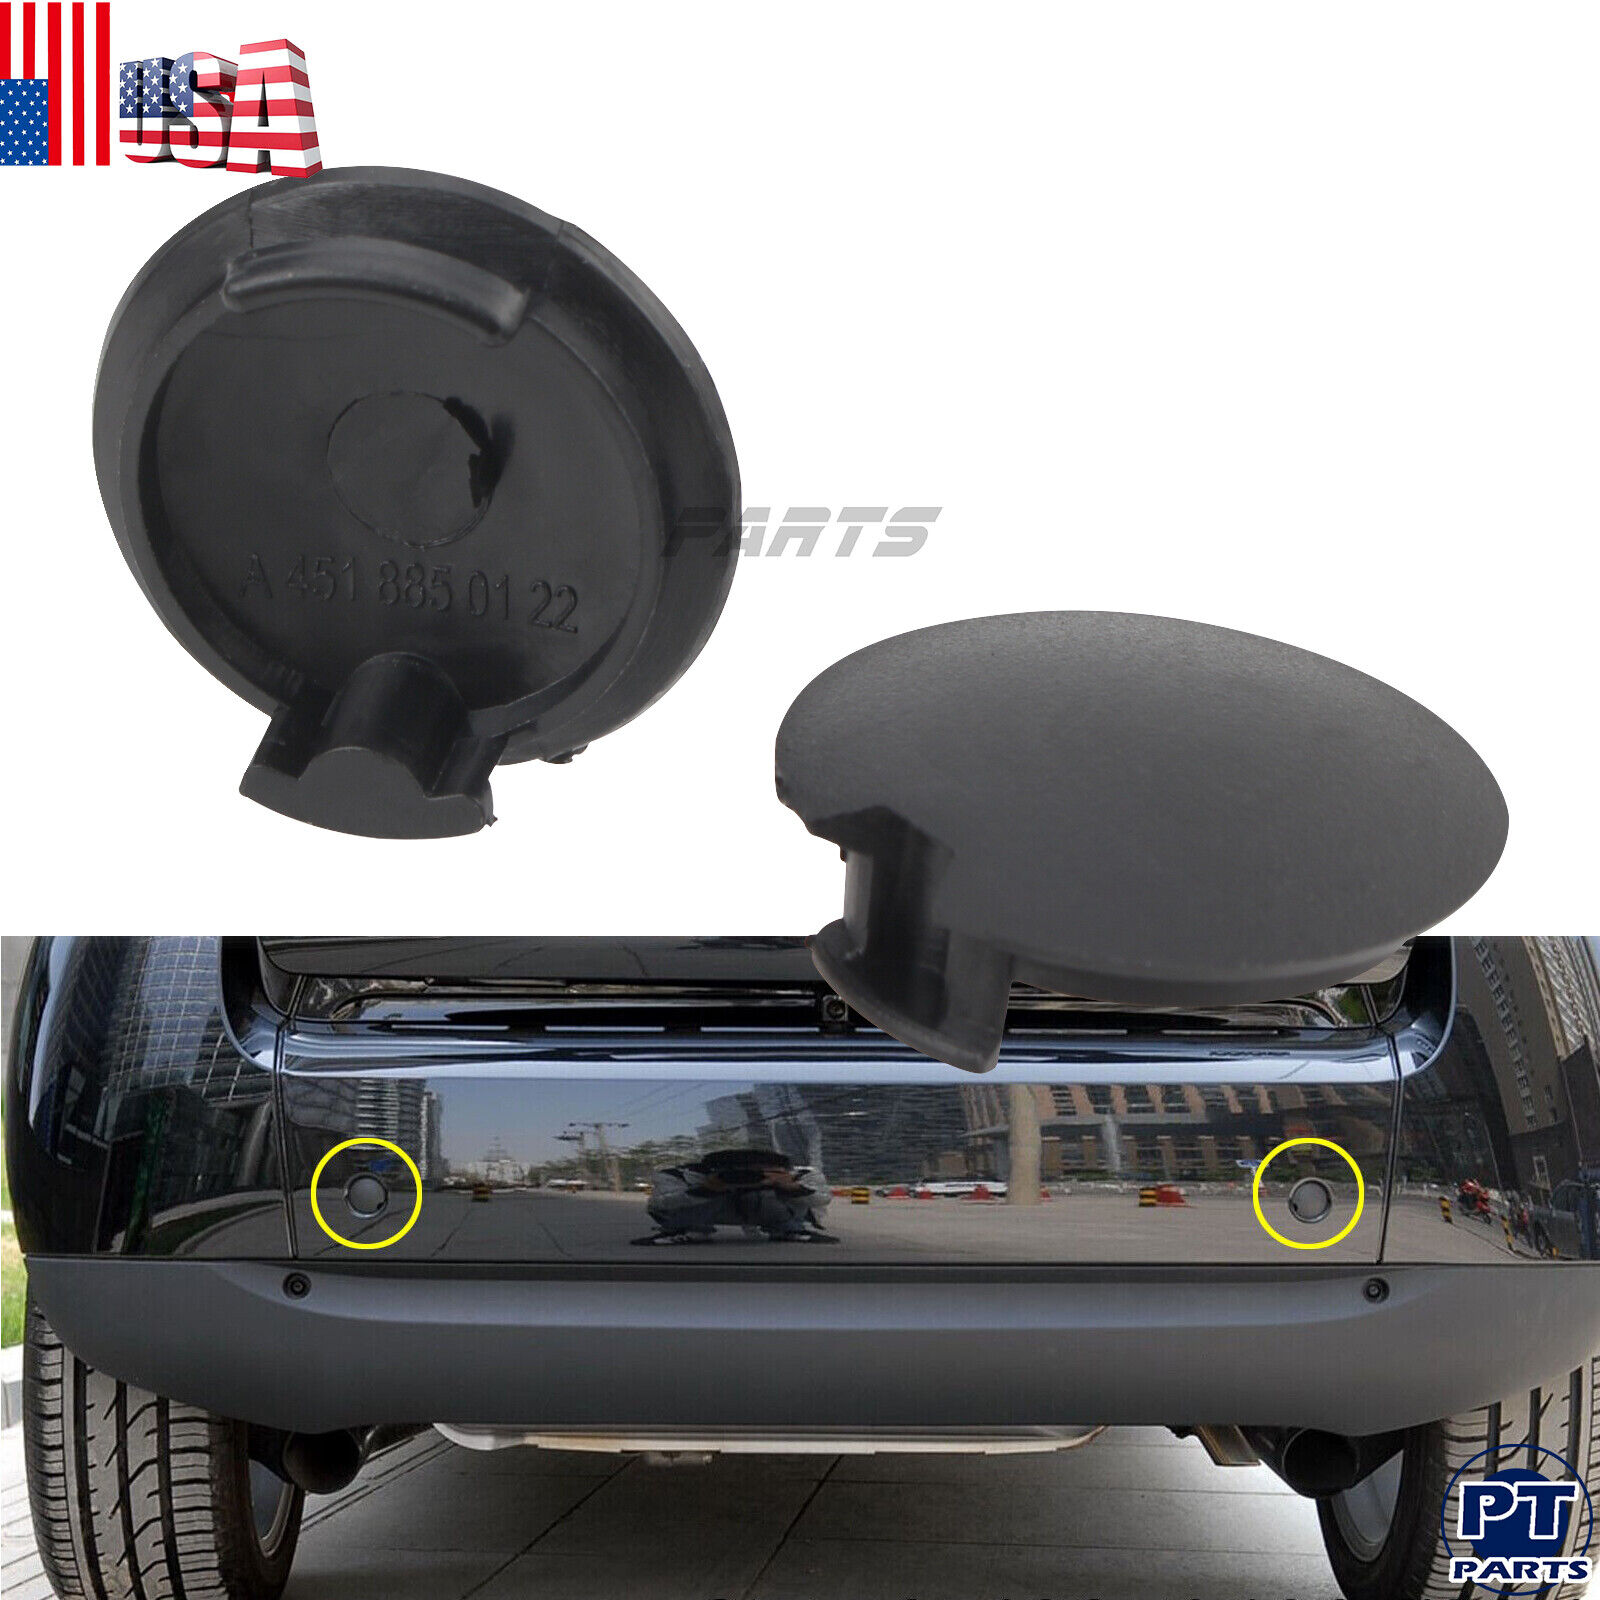 2x Rear Bumper Towing Eye Cover Tow Cap Plug Fits For 2008-2016 Smart Fortwo US